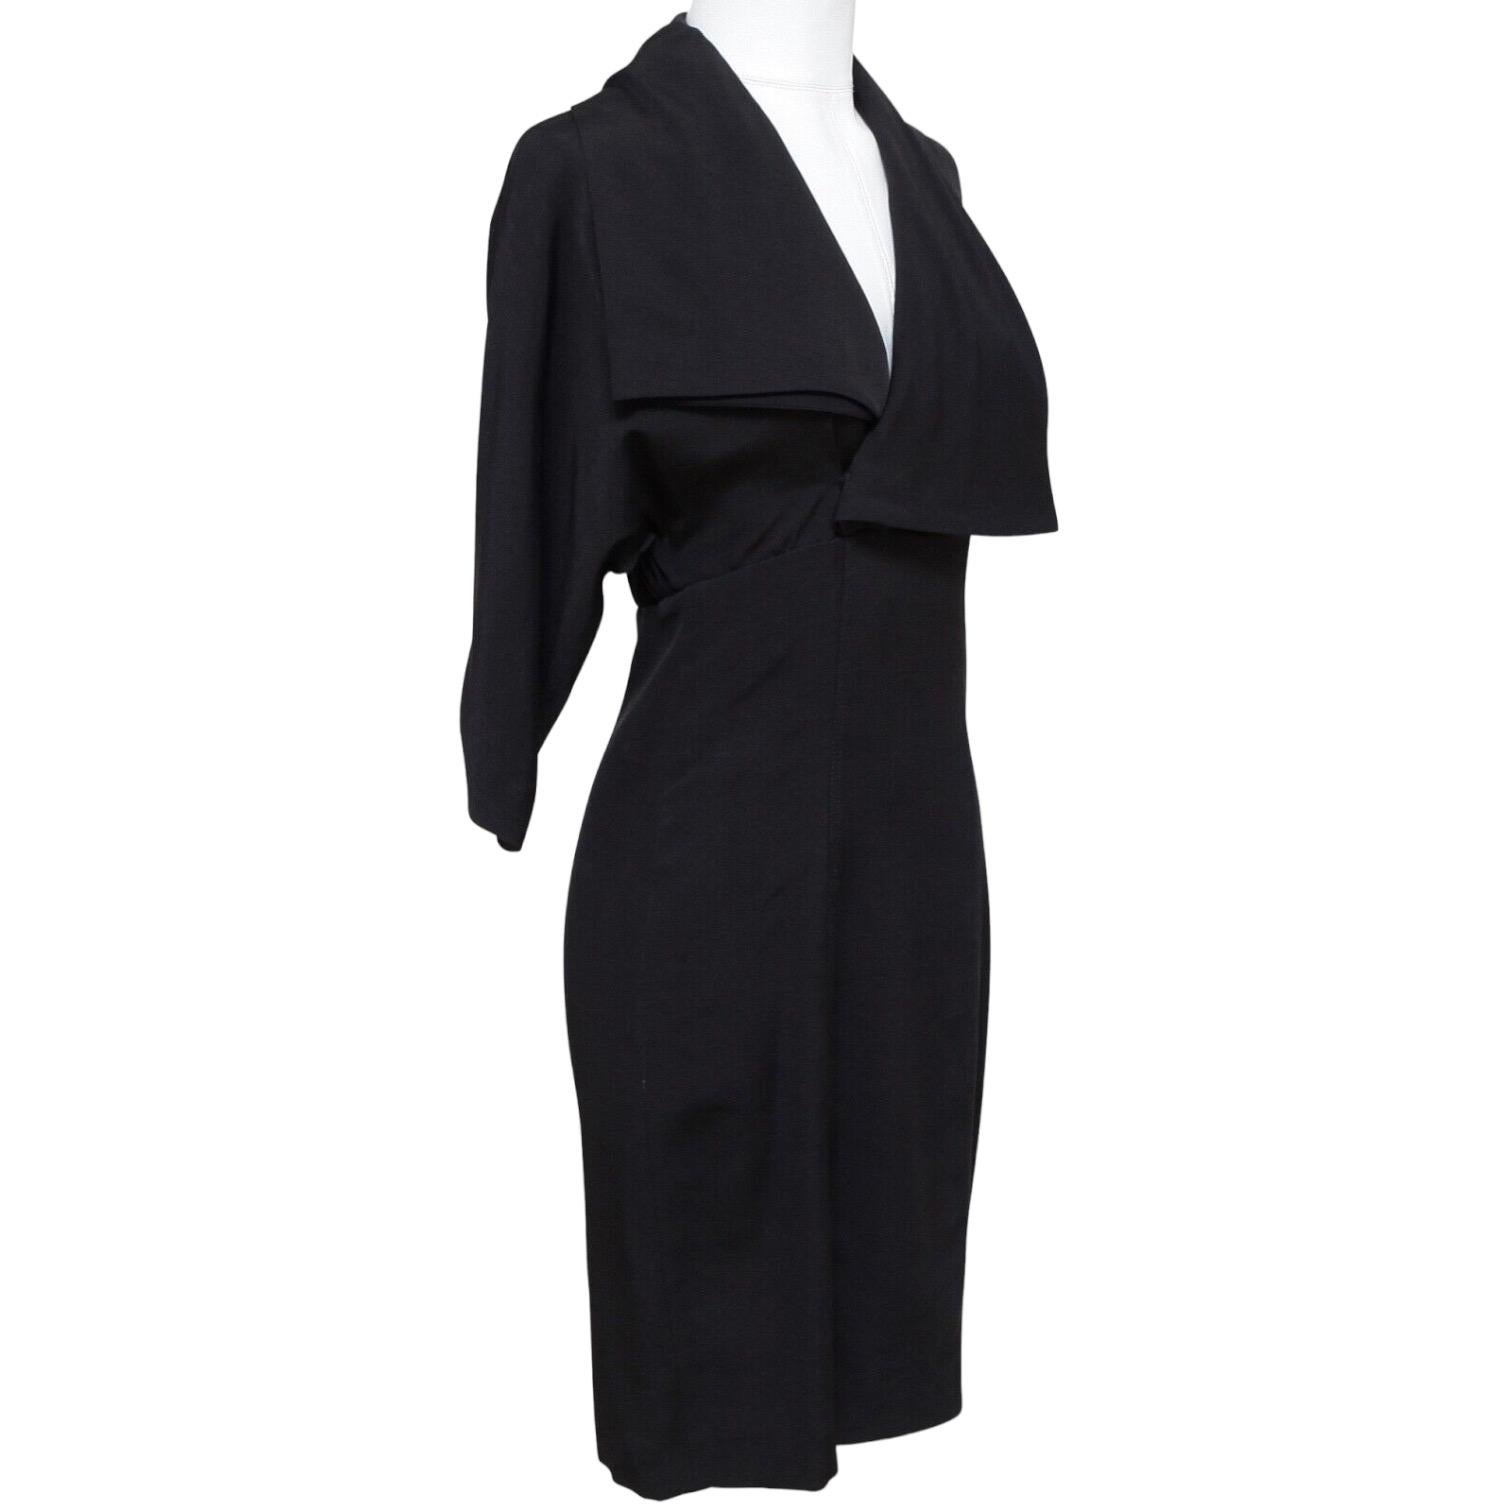 GUARANTEED AUTHENTIC STELLA MCCARTNEY STUNNING BLACK WOOL SILK DRESS



Design:
- Black blouson style wool silk blend dress.
- Straight silhouette.
- Elasticized at waist with covered front button.
- Concealed side zipper.
- 3/4 dolman sleeve with